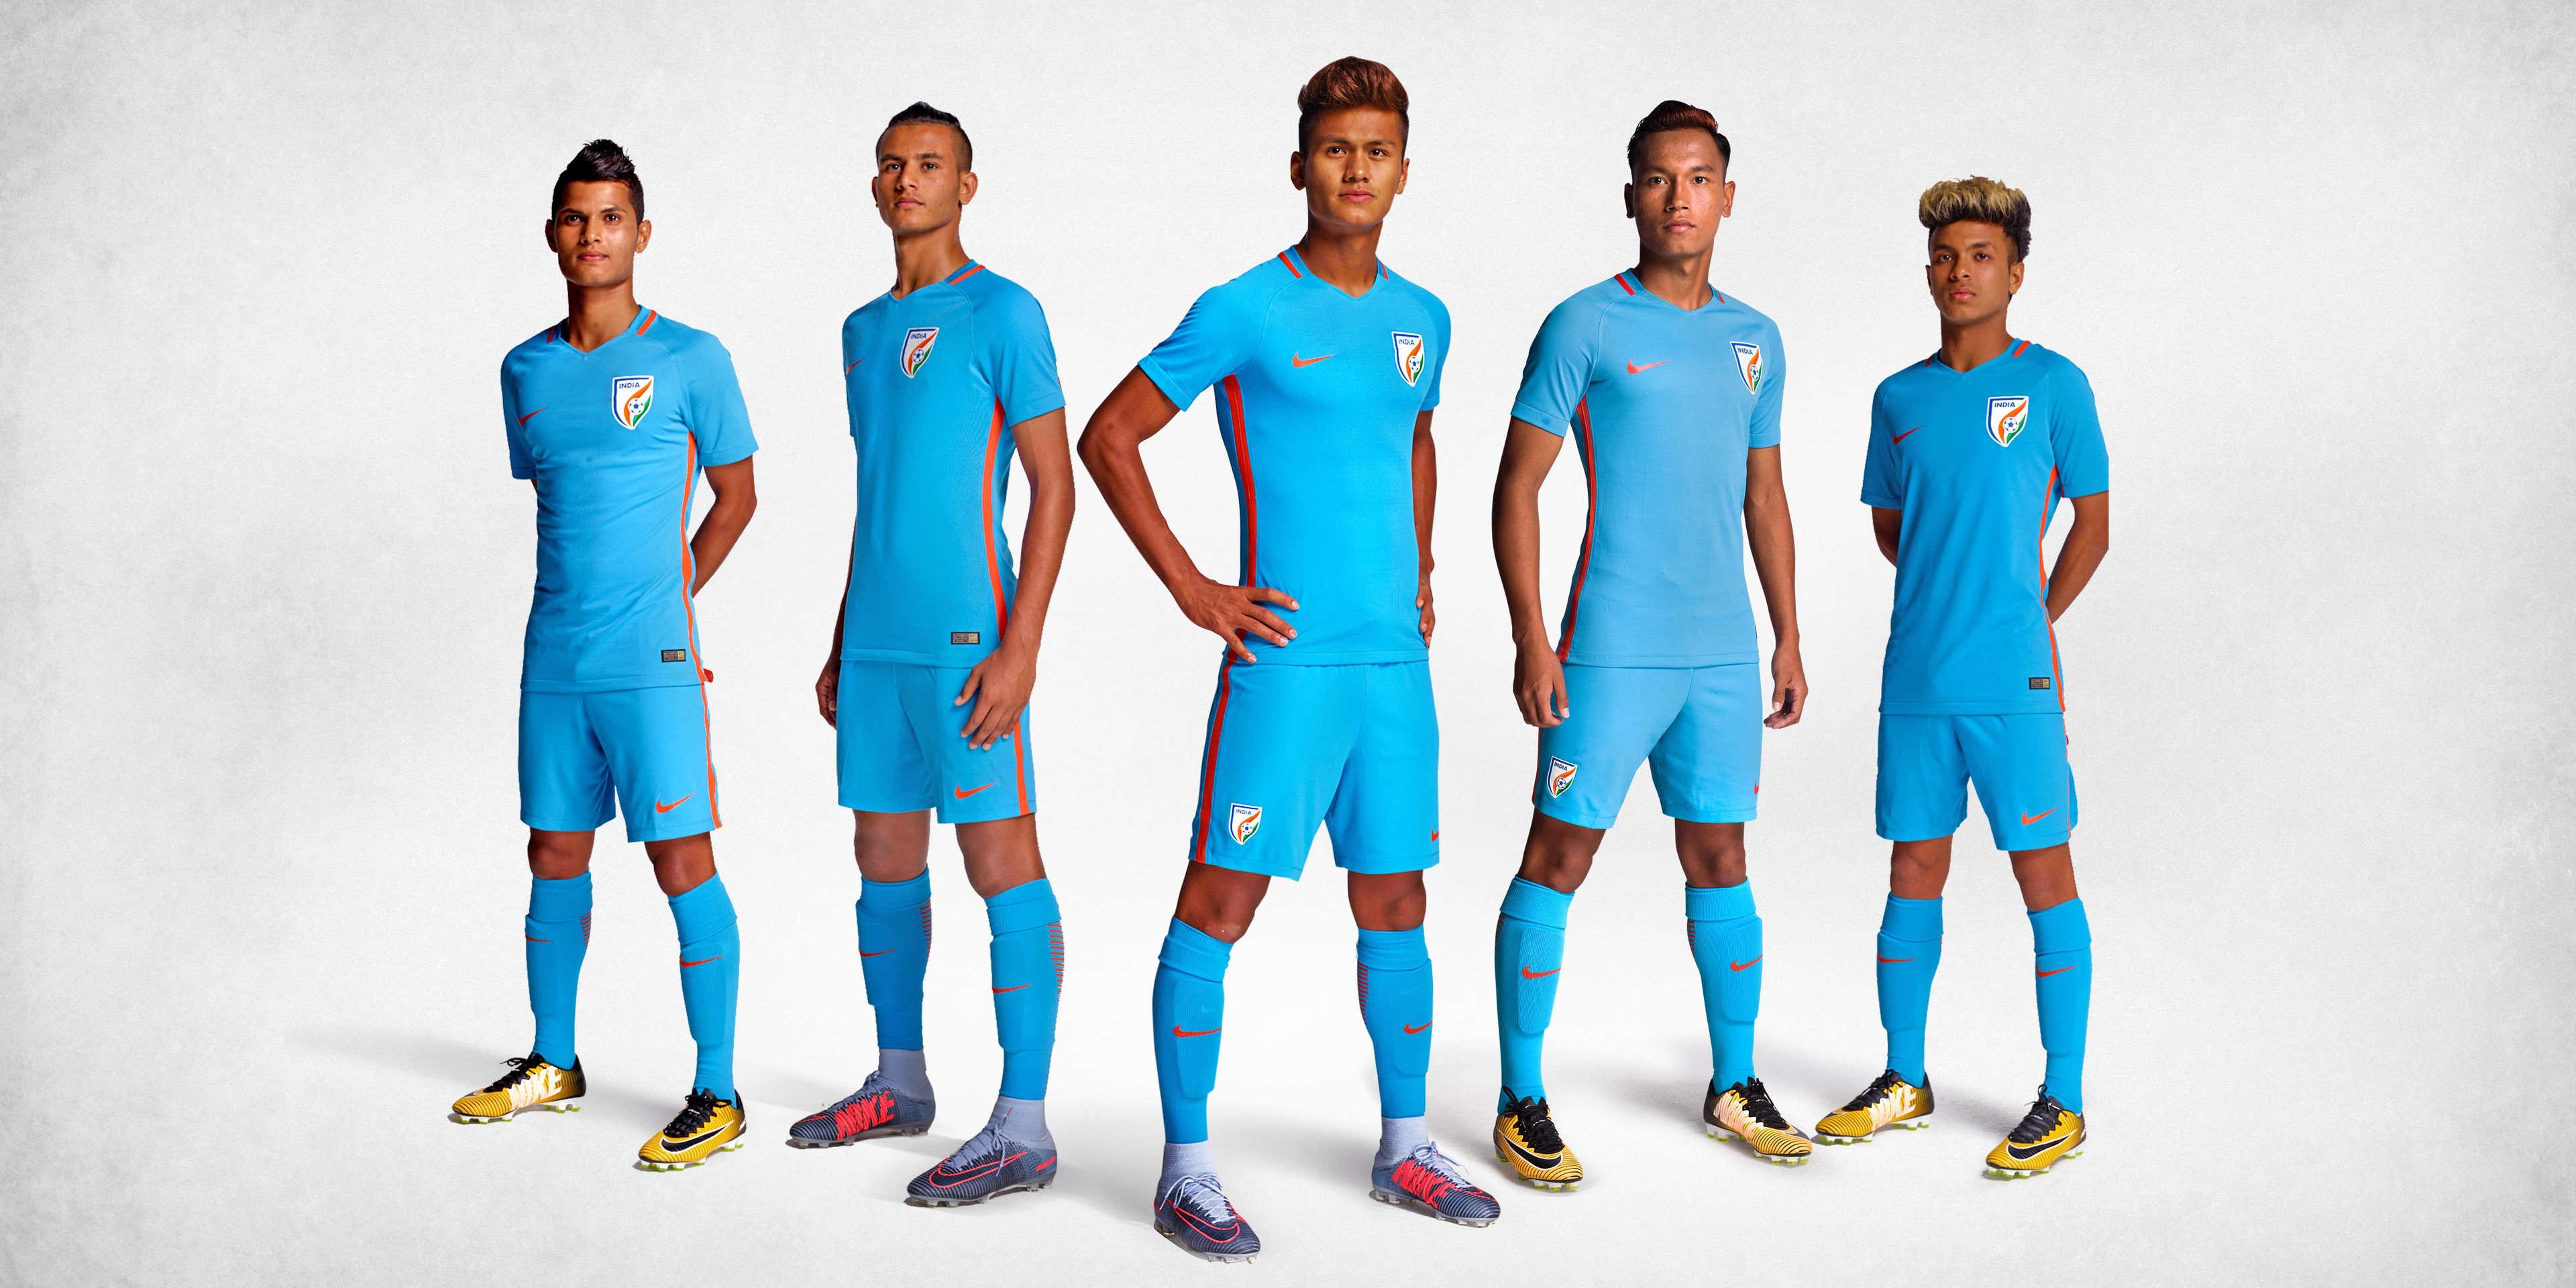 Here's your chance to grab the all new Indian National Team jersey from Nike!